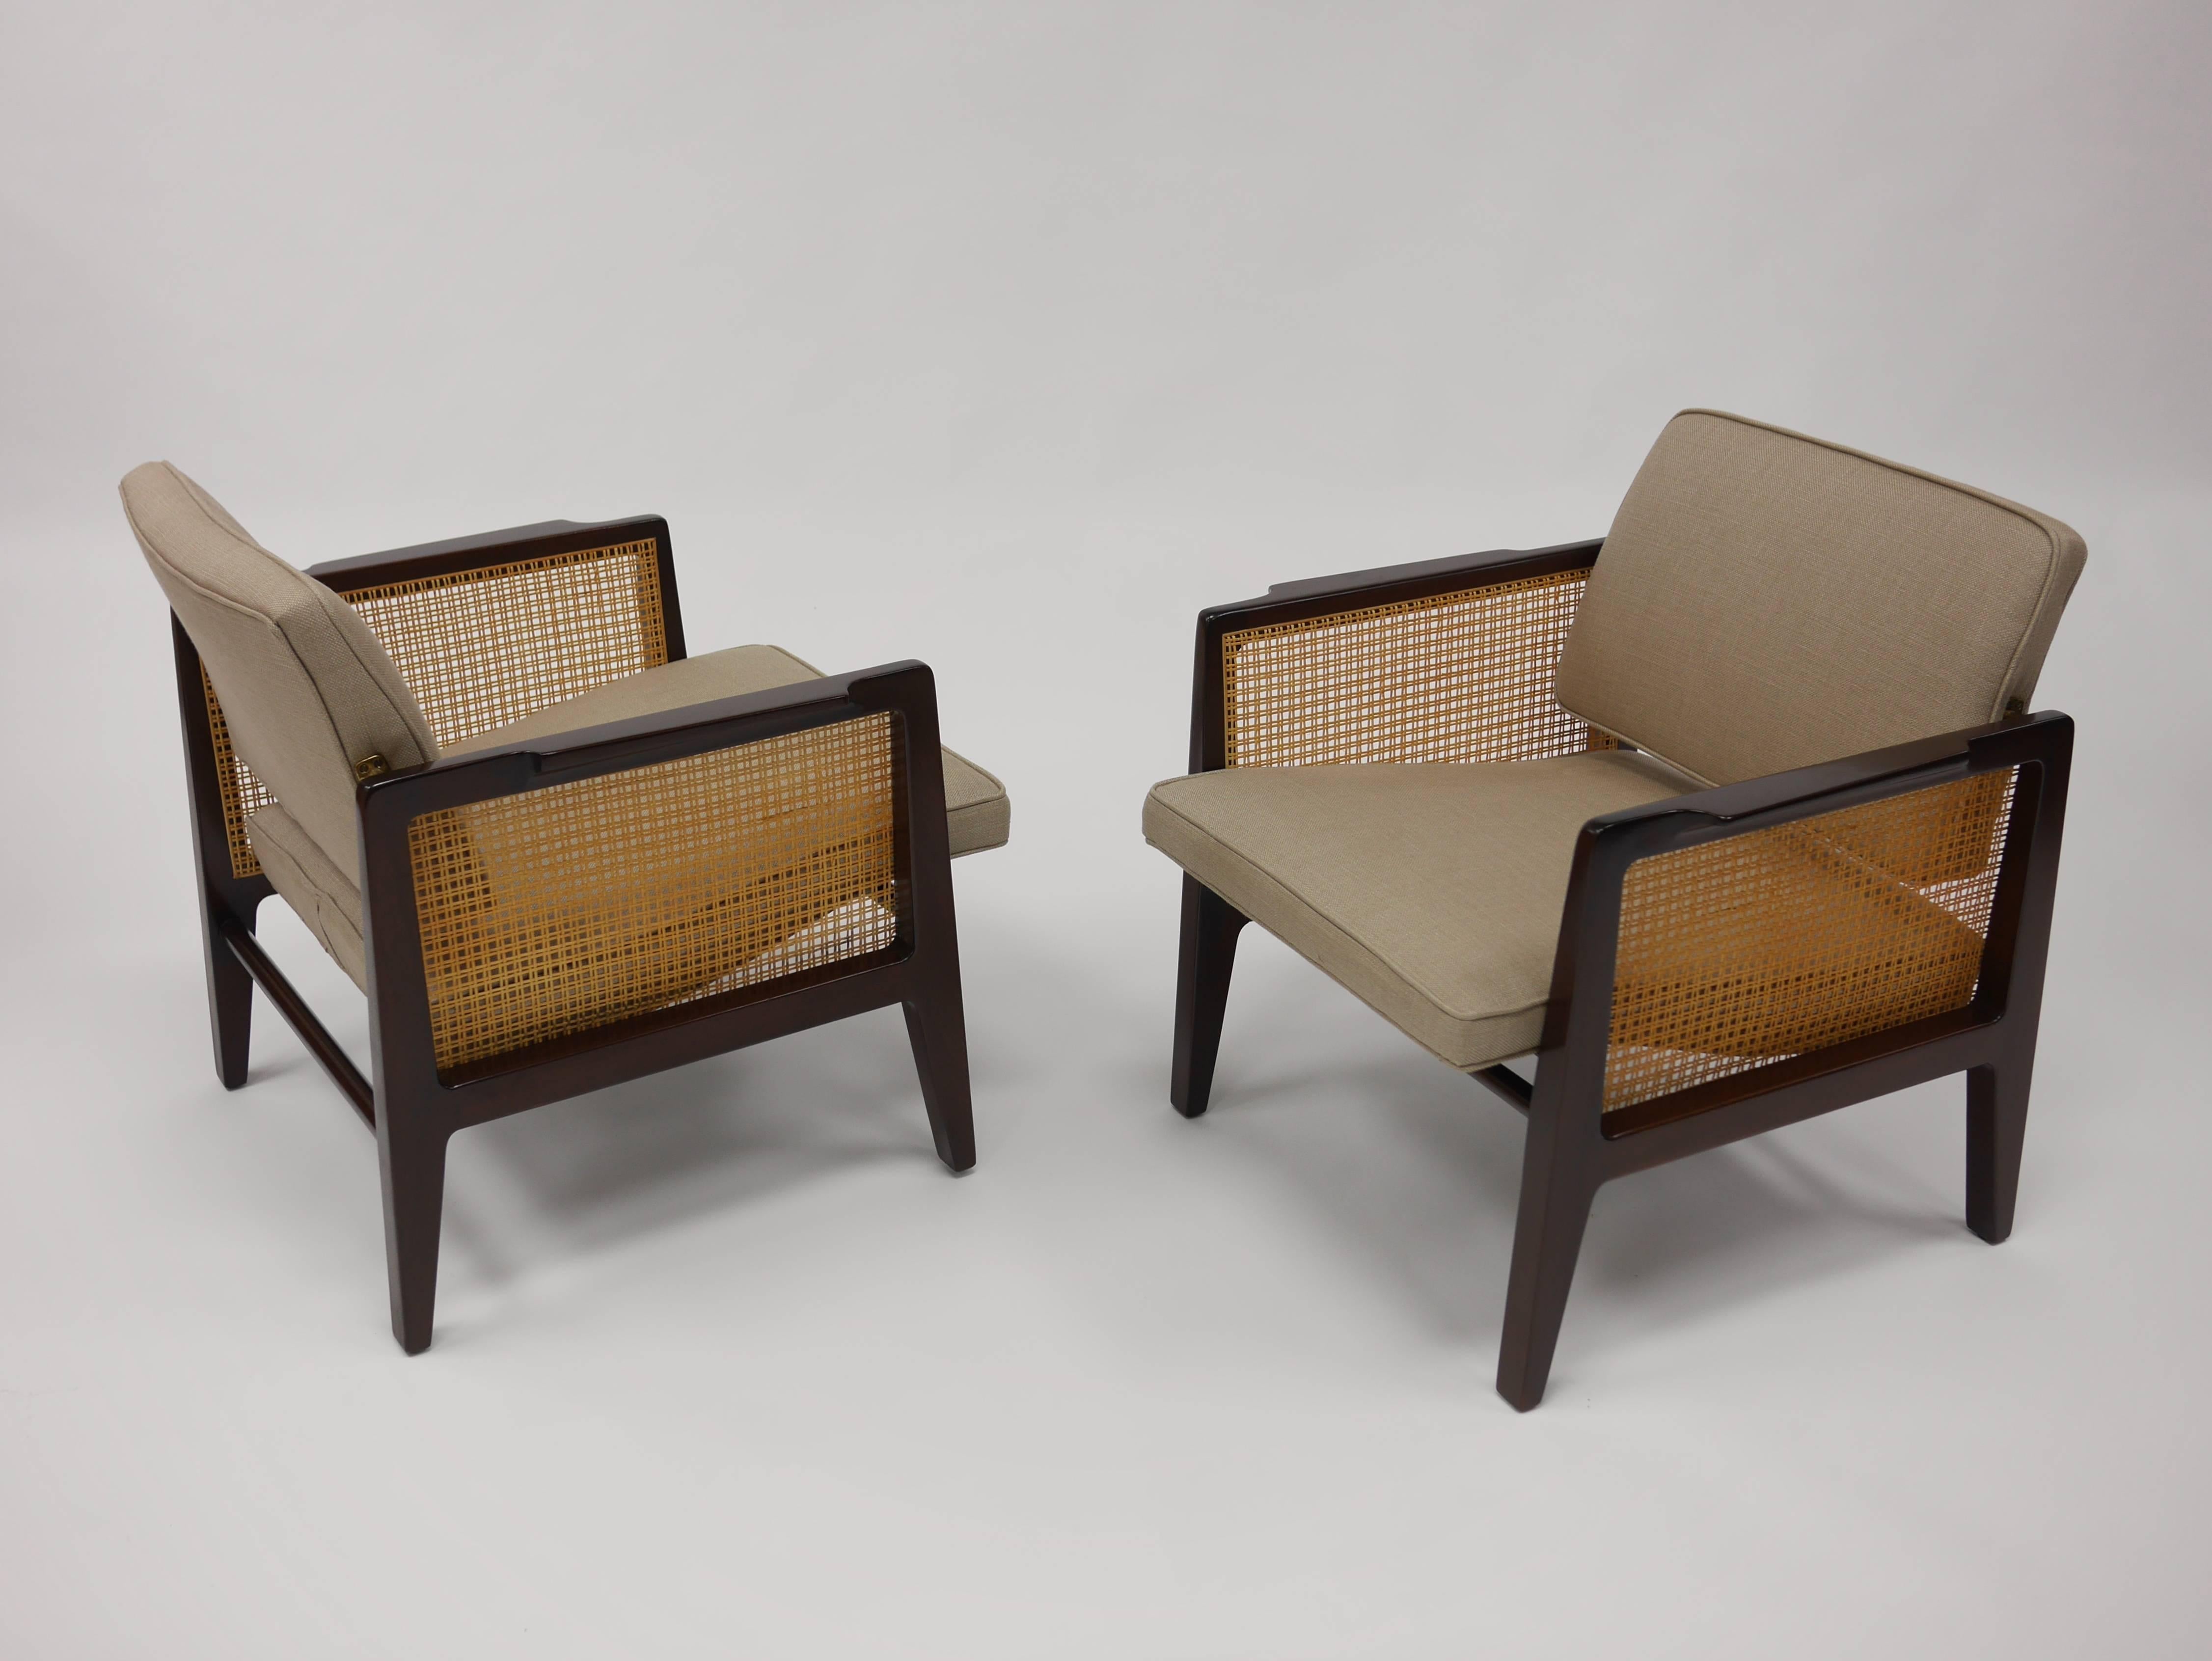 Pair of lounge chairs model 5513 by Dunbar. Having sculpted mahogany frames, caned sides and brass hardware. The backs tilt to accommodate the angle of the sitter. These lounge chairs while smaller than typical, are very comfortable and as with all